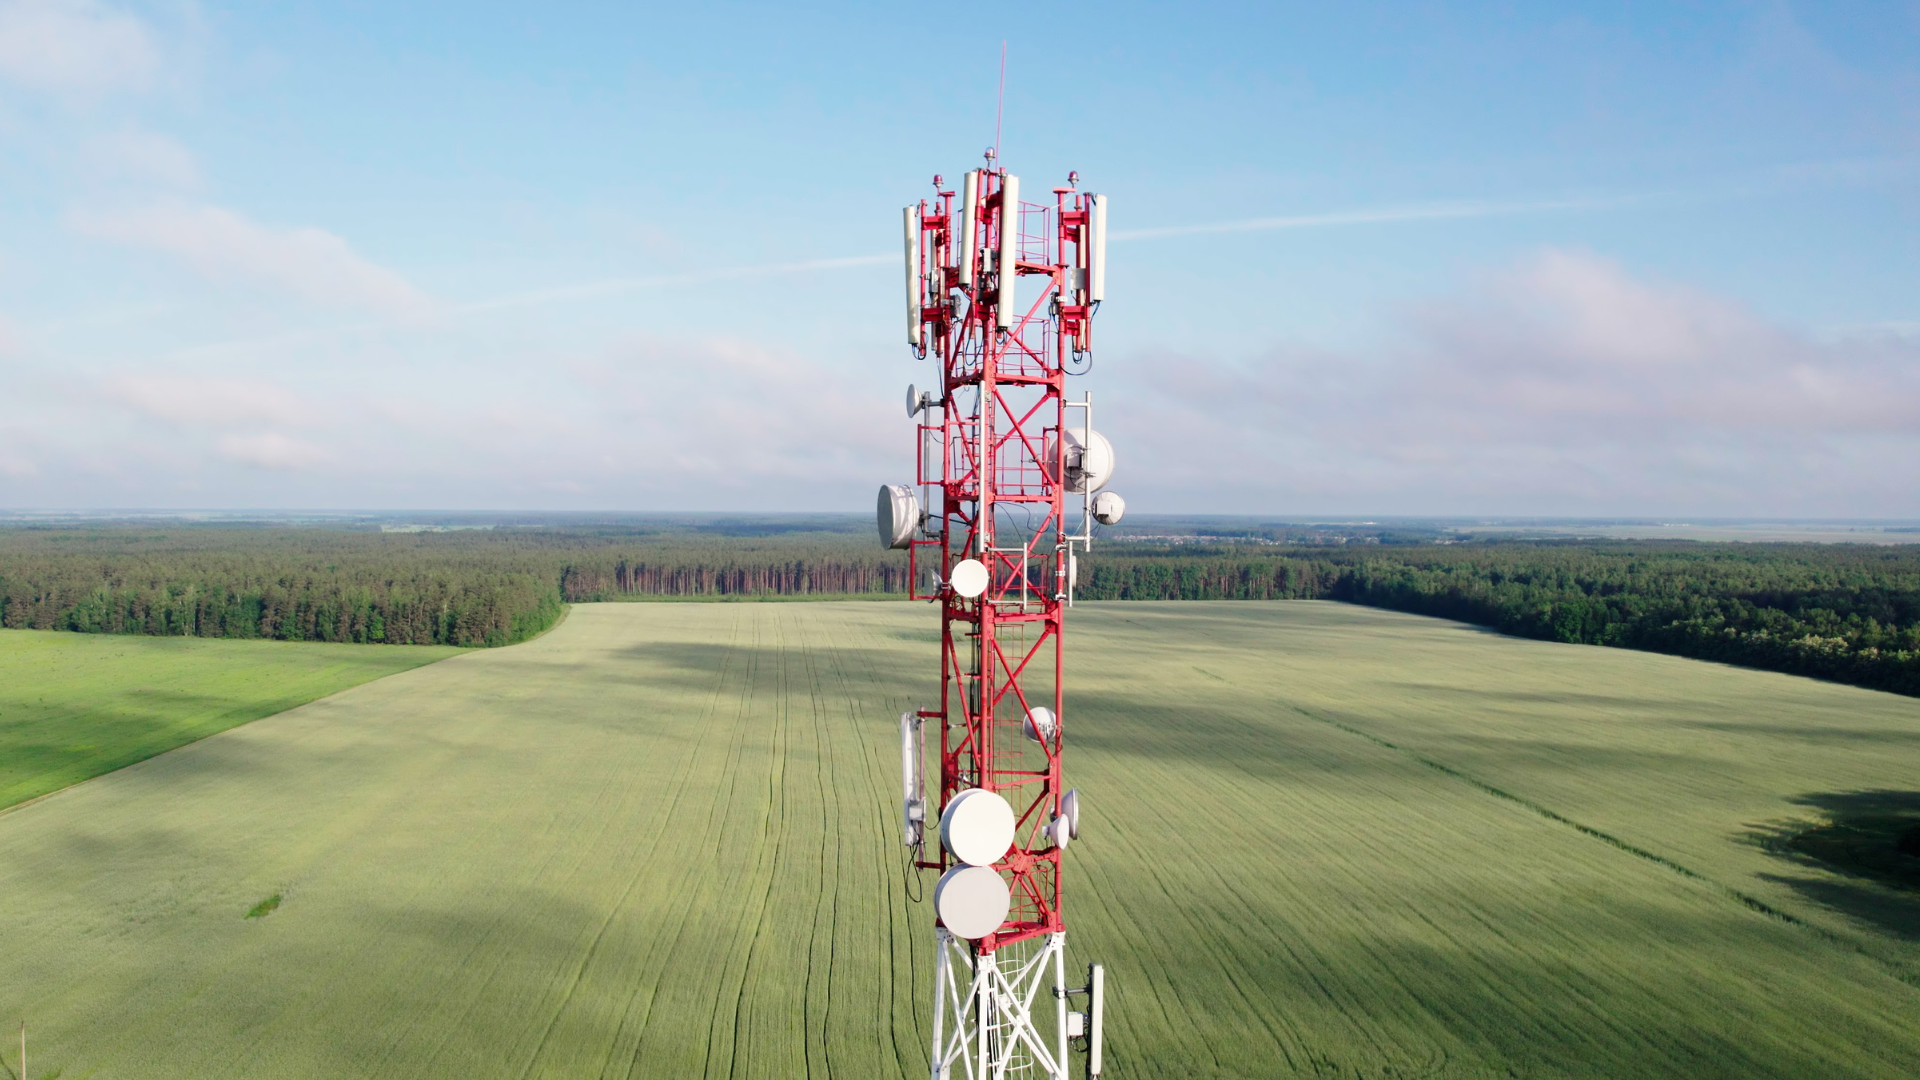 State aid: European Commission approves a €500 million Spanish programme under the Recovery and Resilience Mechanism to support the roll-out of broadband backhaul networks in rural areas